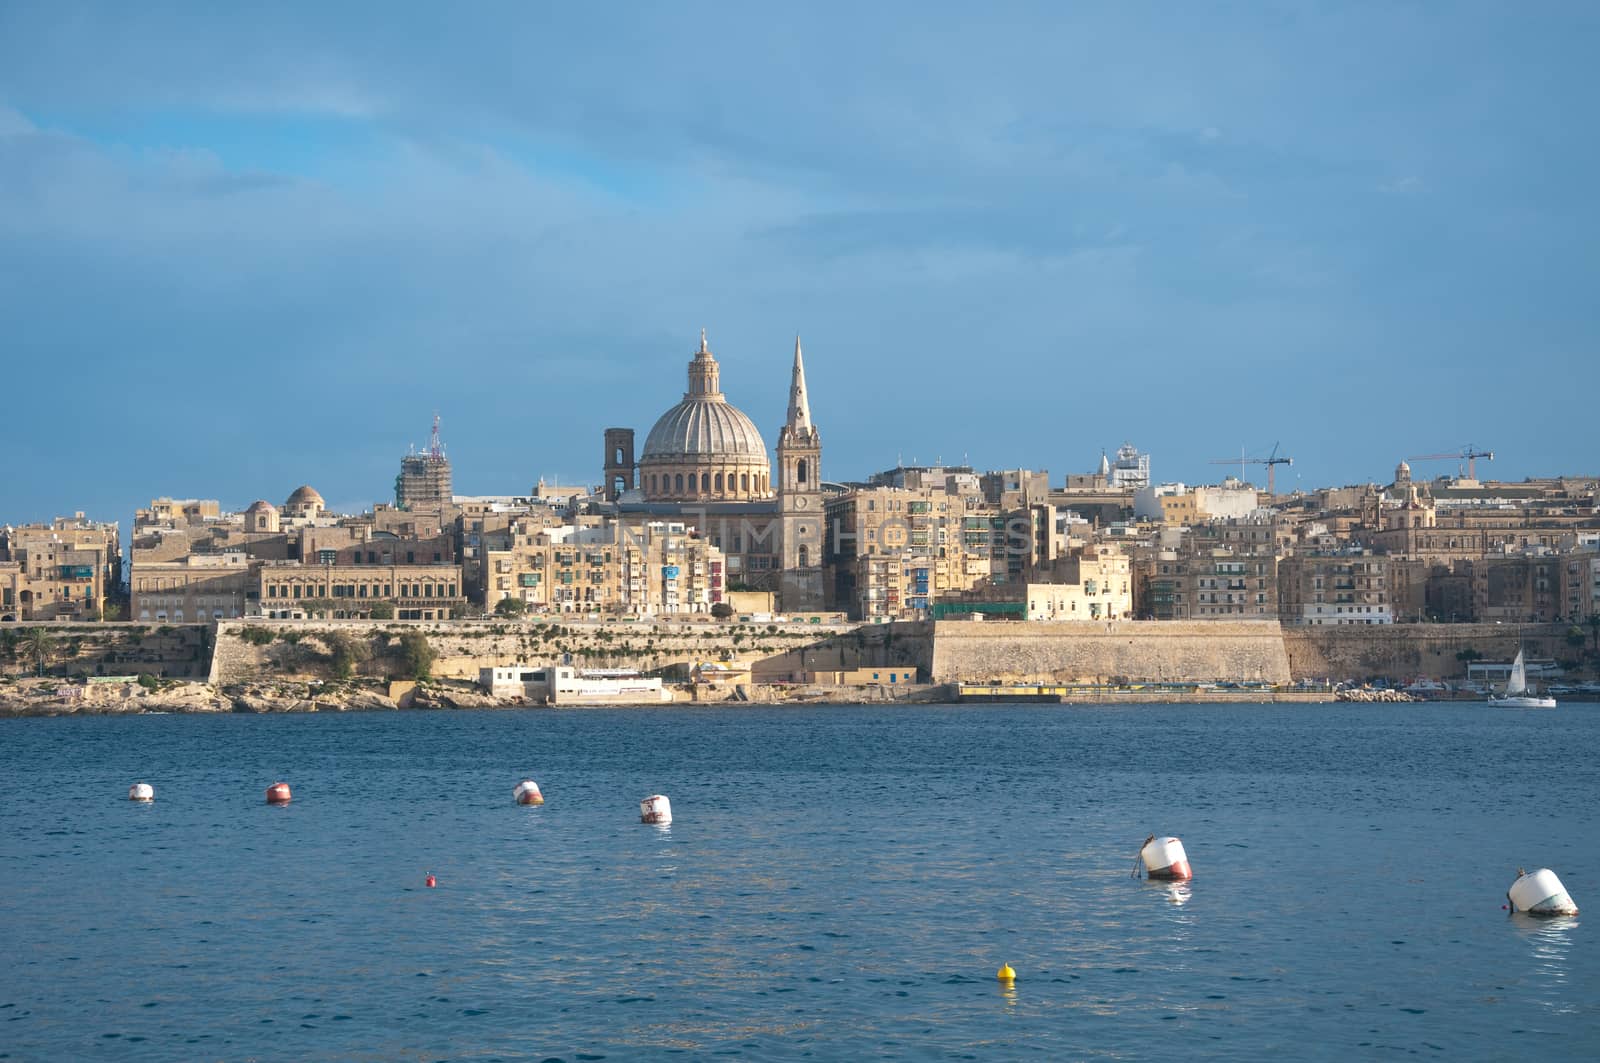 Overview of the city of Valletta, Malta, from the town of Sliema